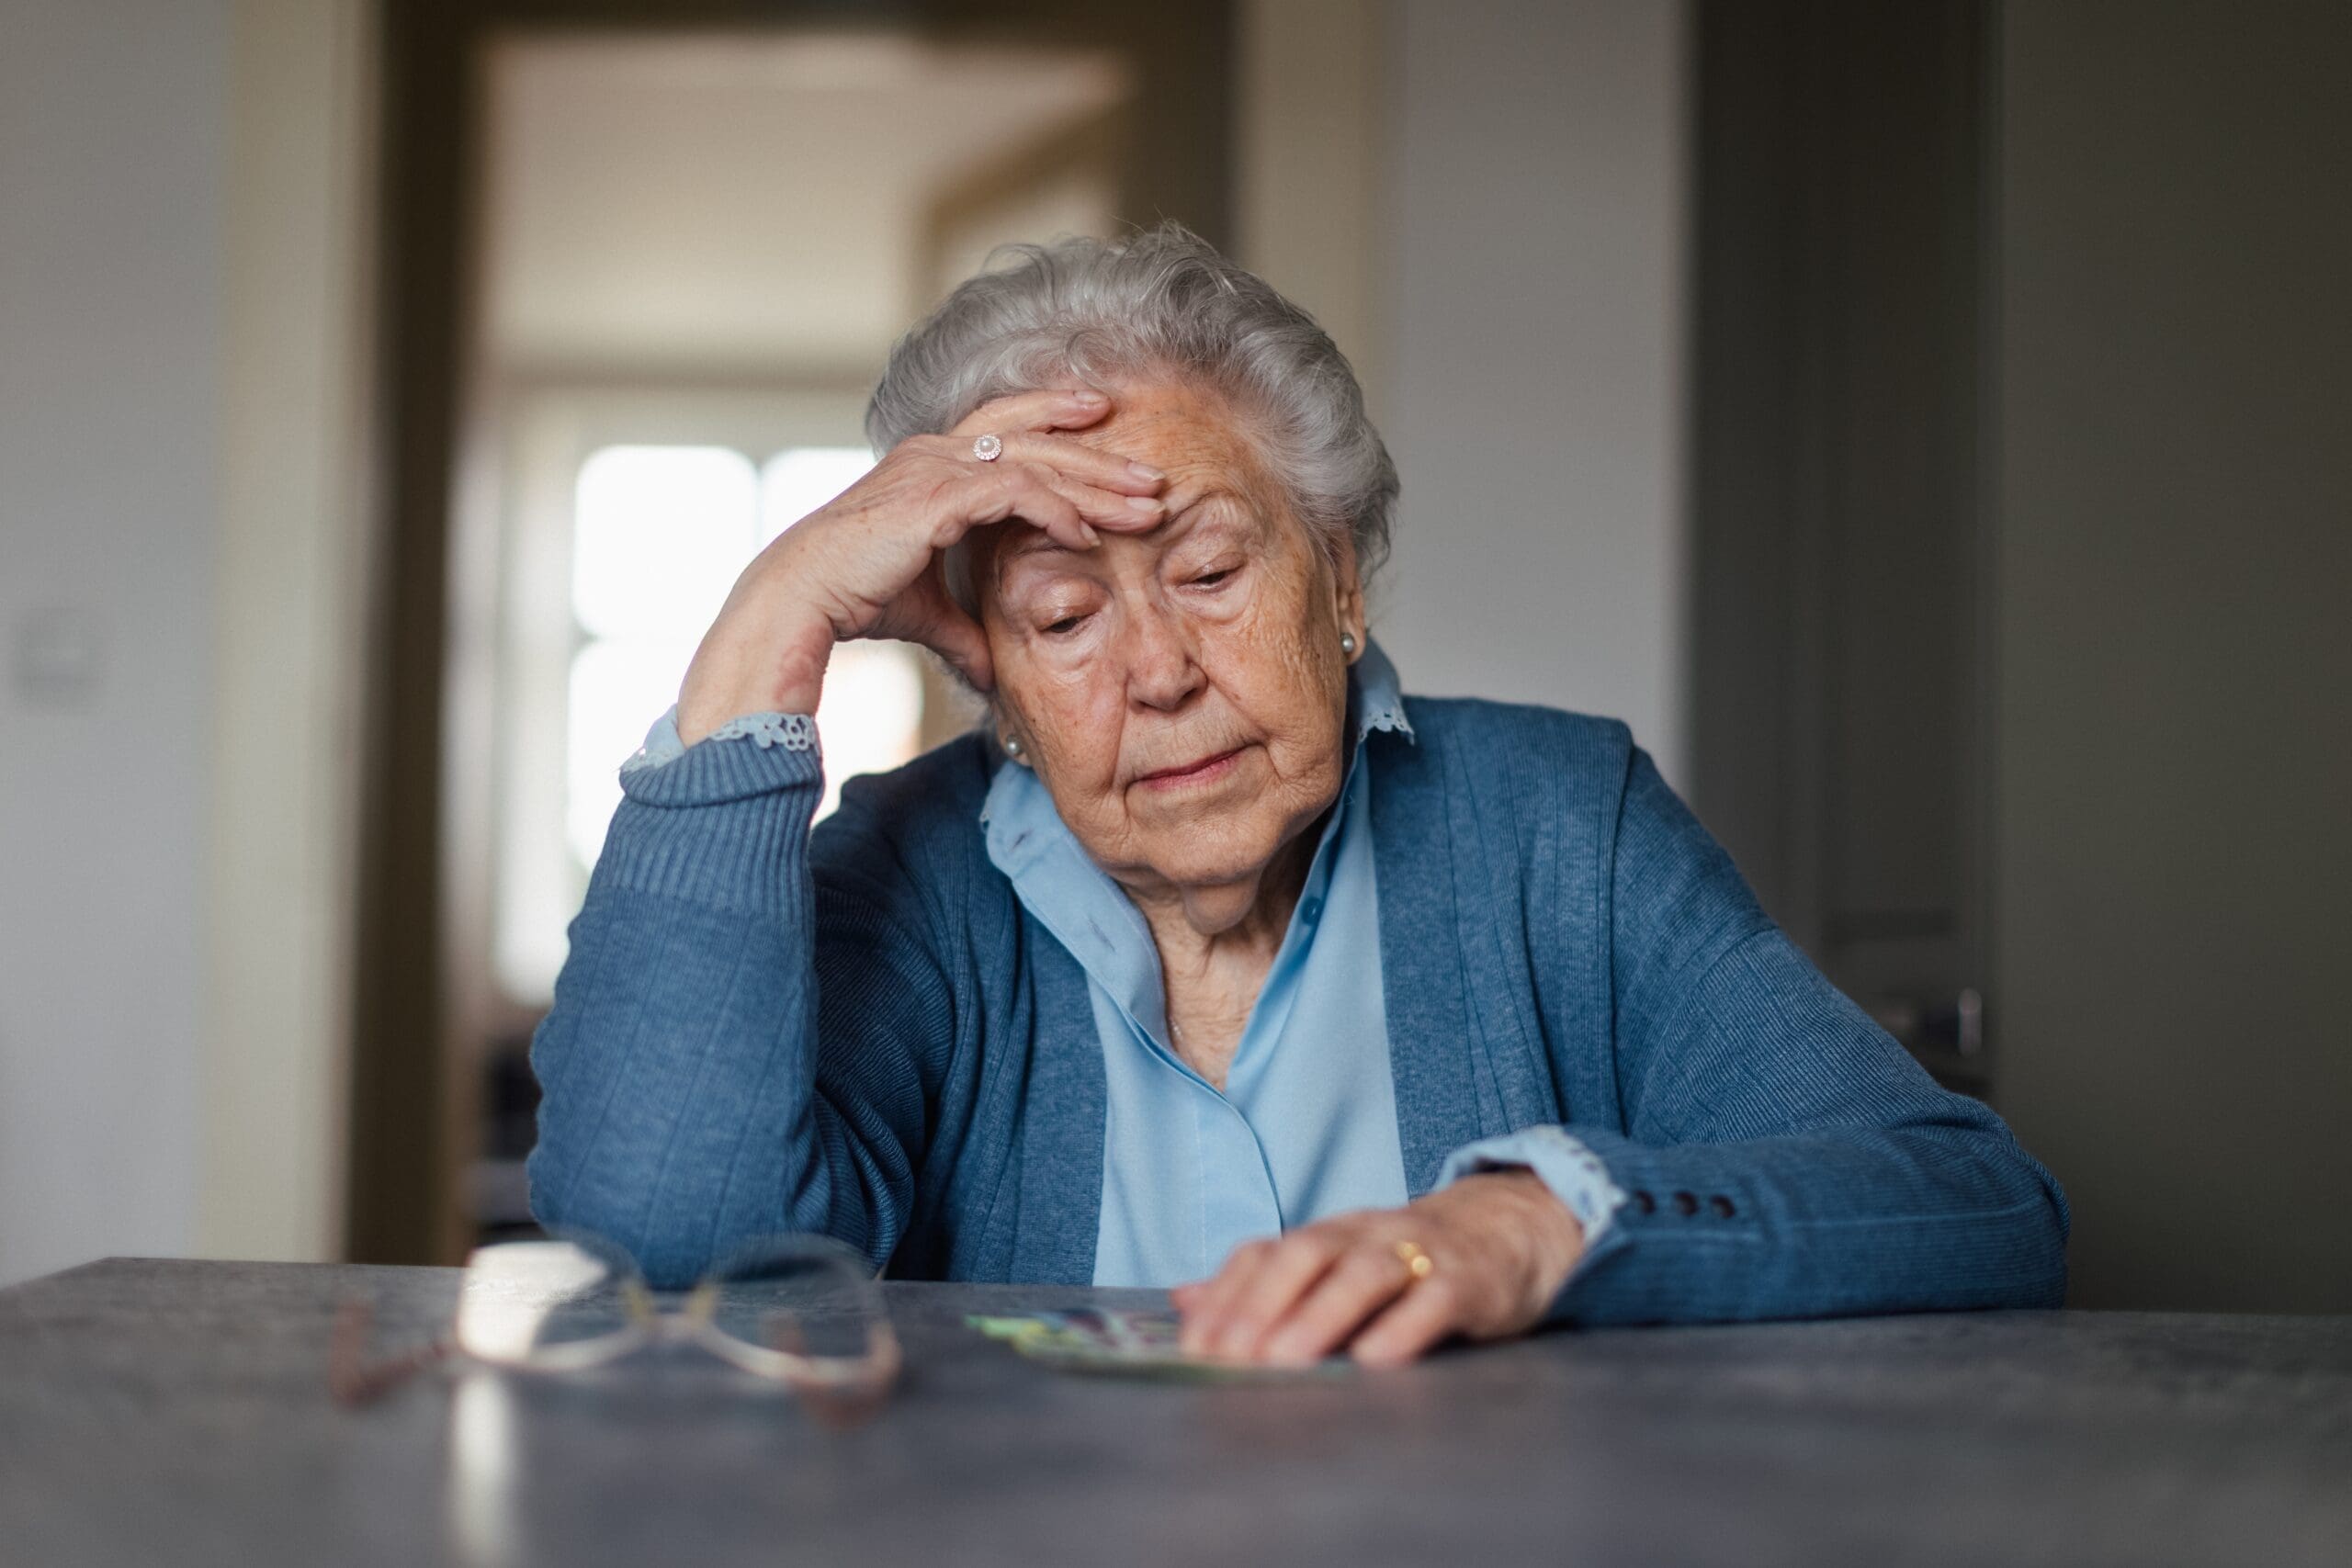 elderly lady concerned over social security benefits - SOCIAL SECURITY INCOME (SSDI & SSI) LAWYERS